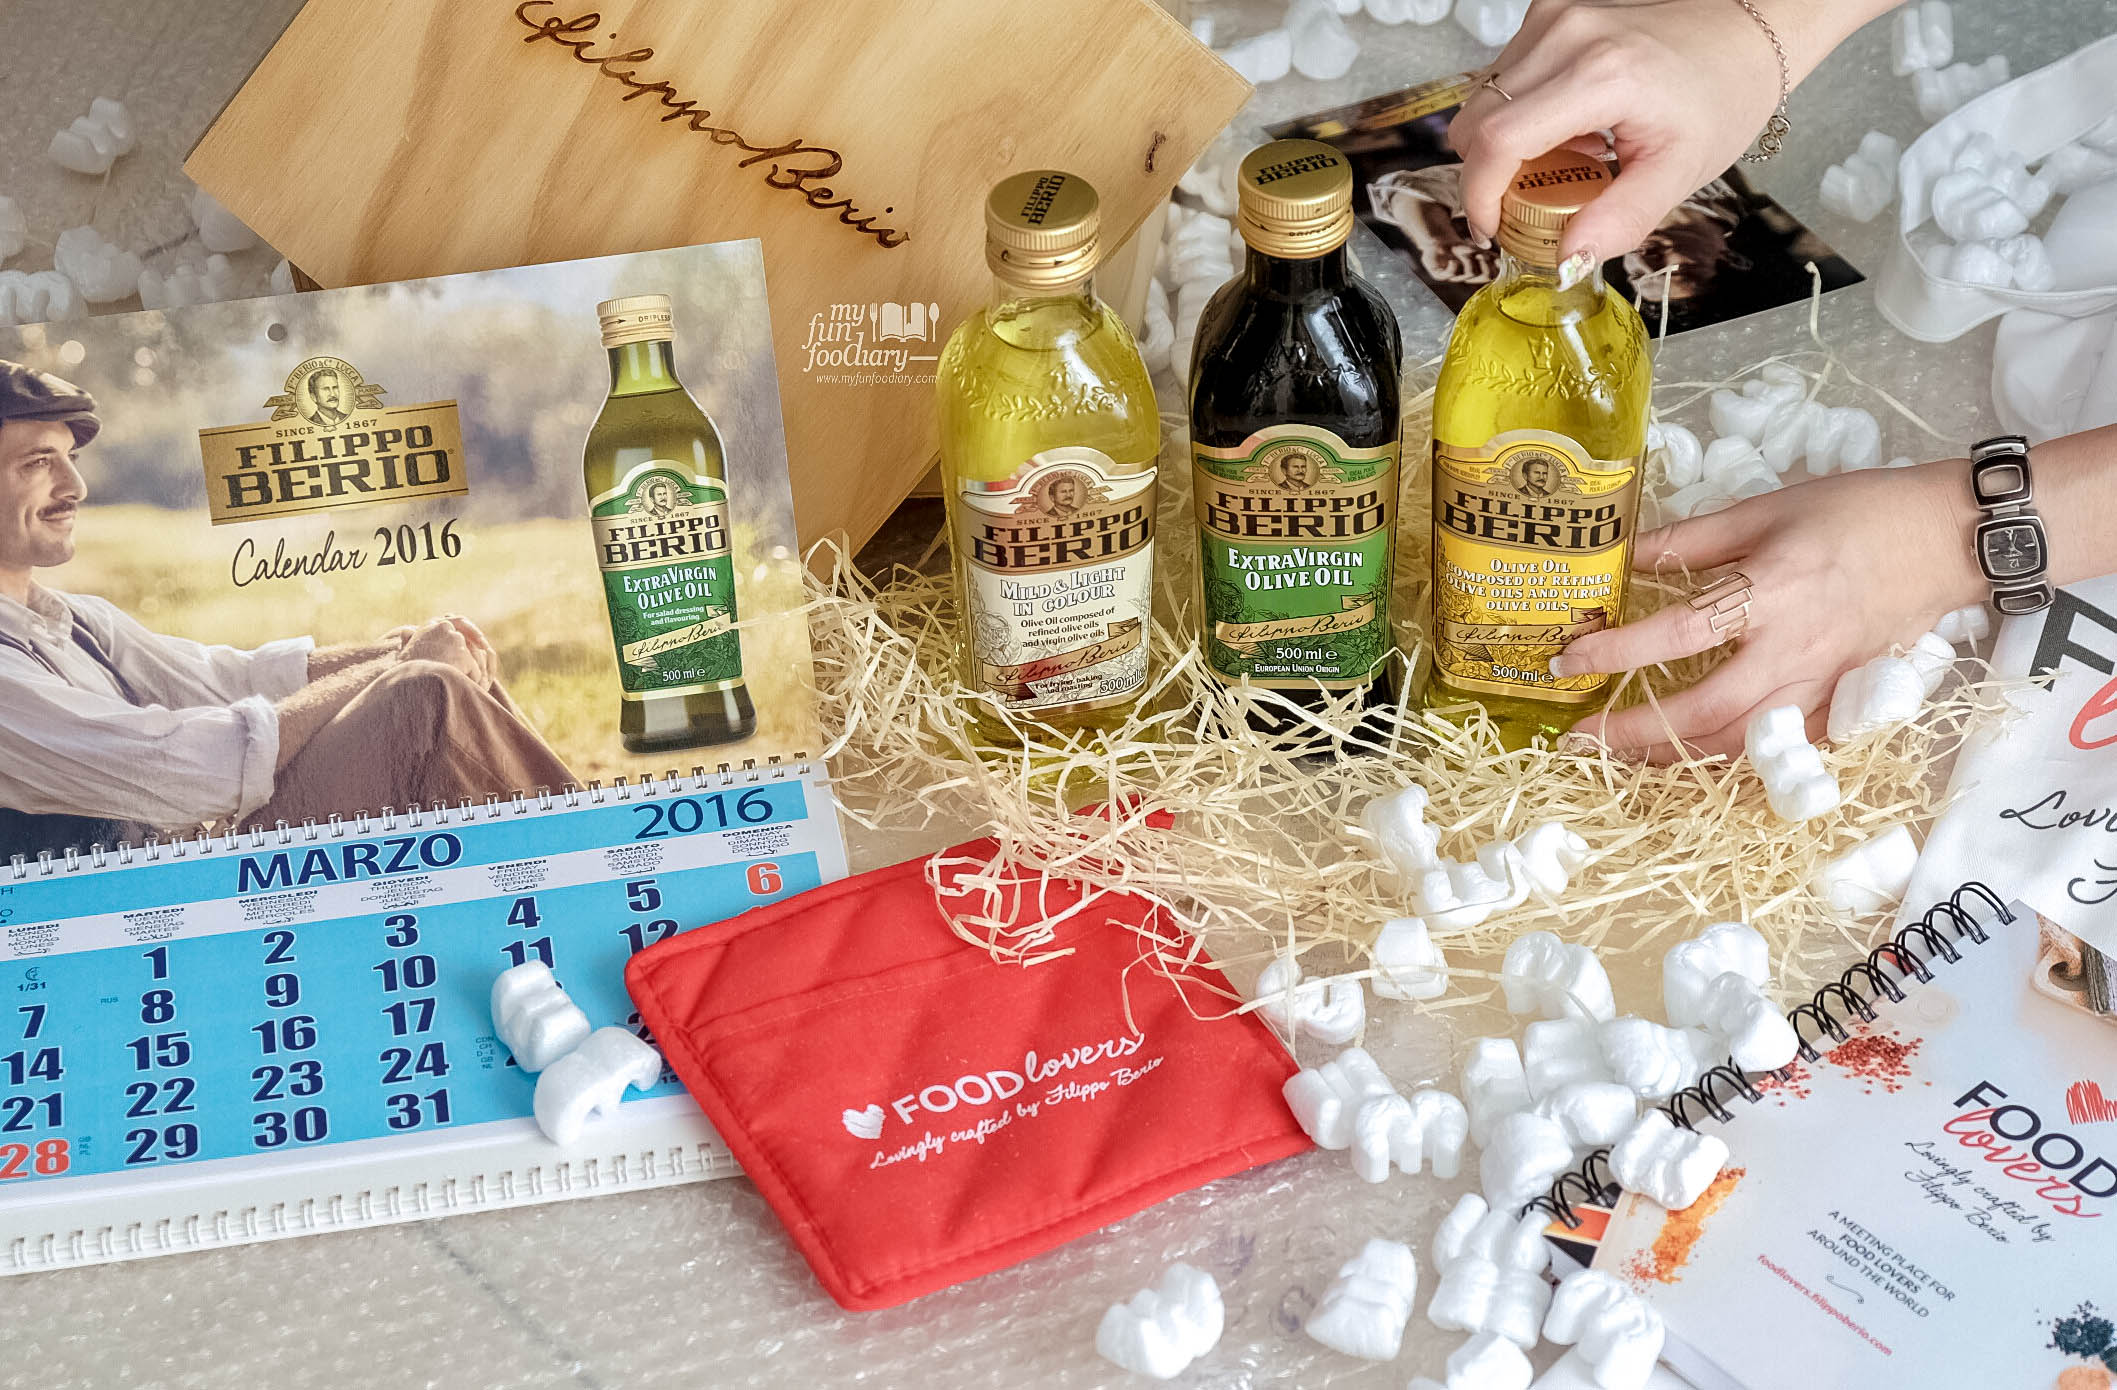 Filippo Berio Olive Oil from Italy for Mullie Myfunfoodiary